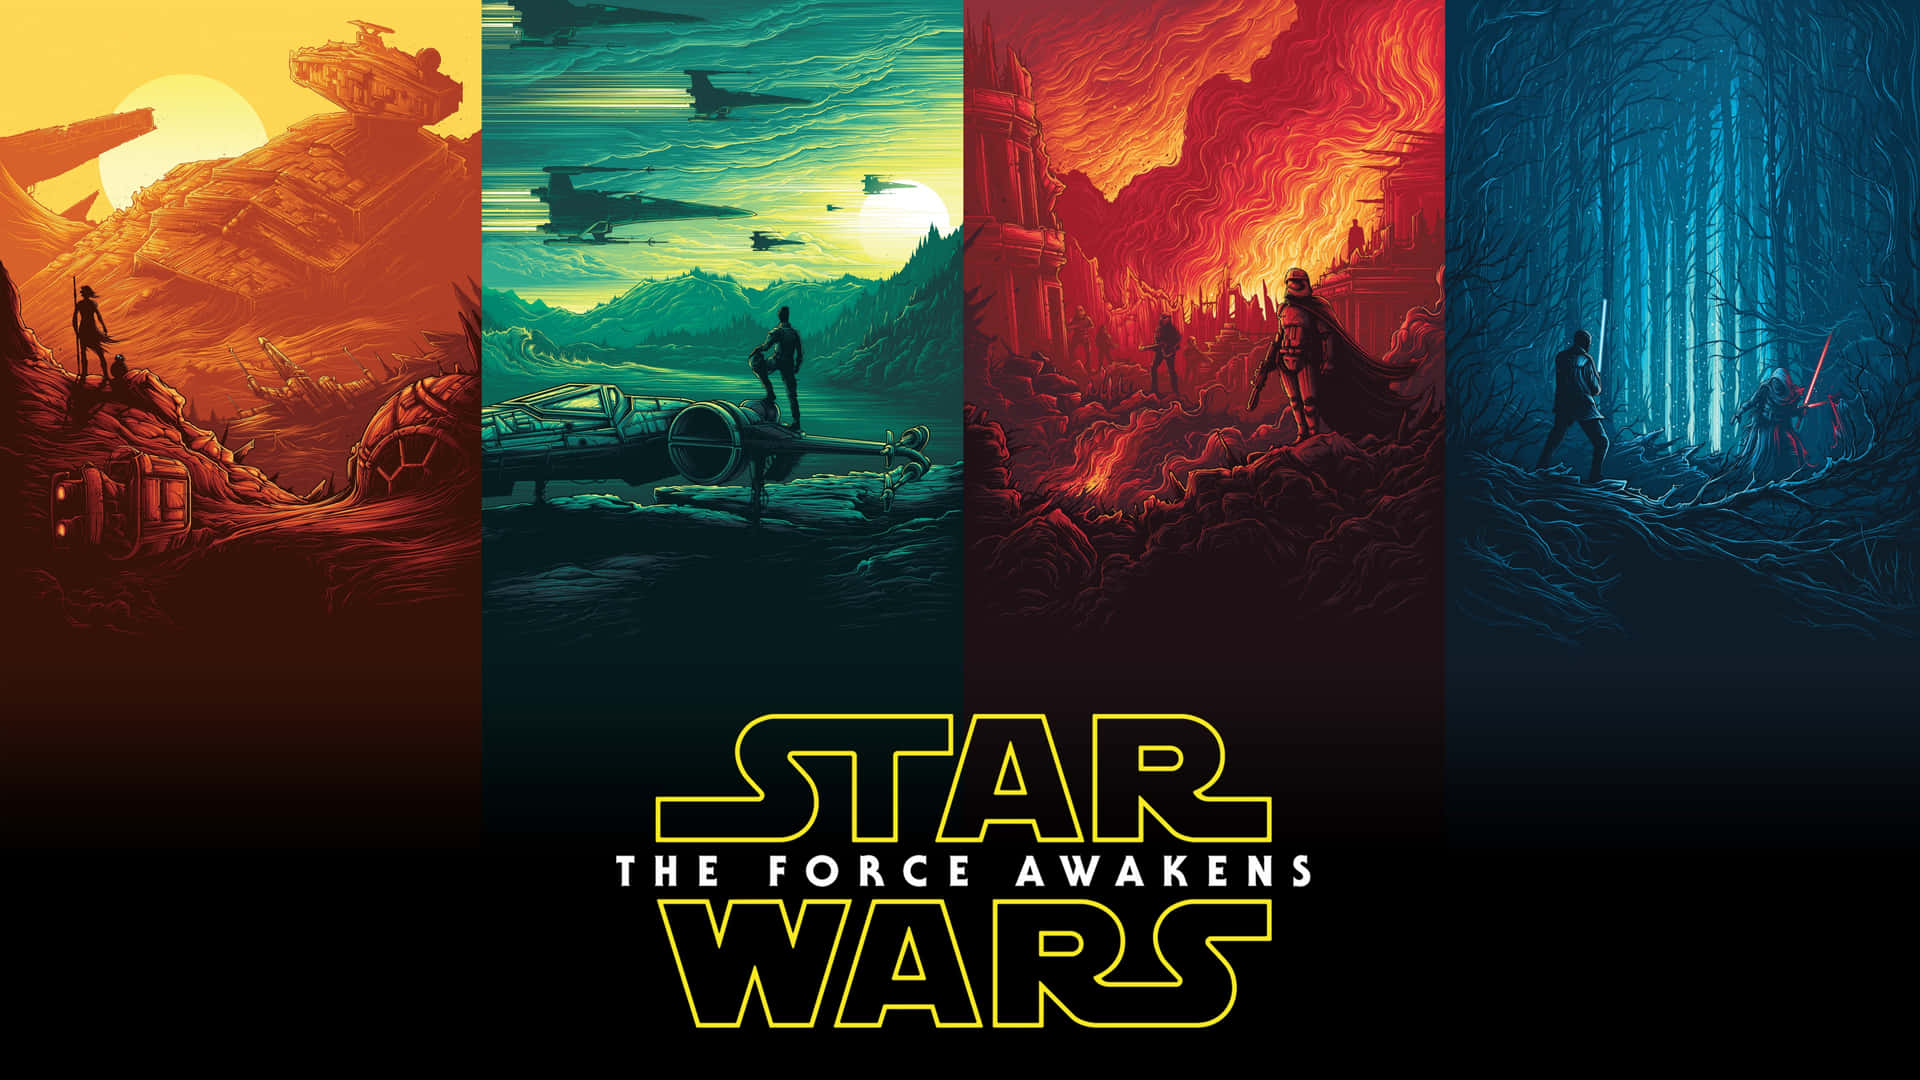 Star Wars The Force Awakens Poster Baggrund